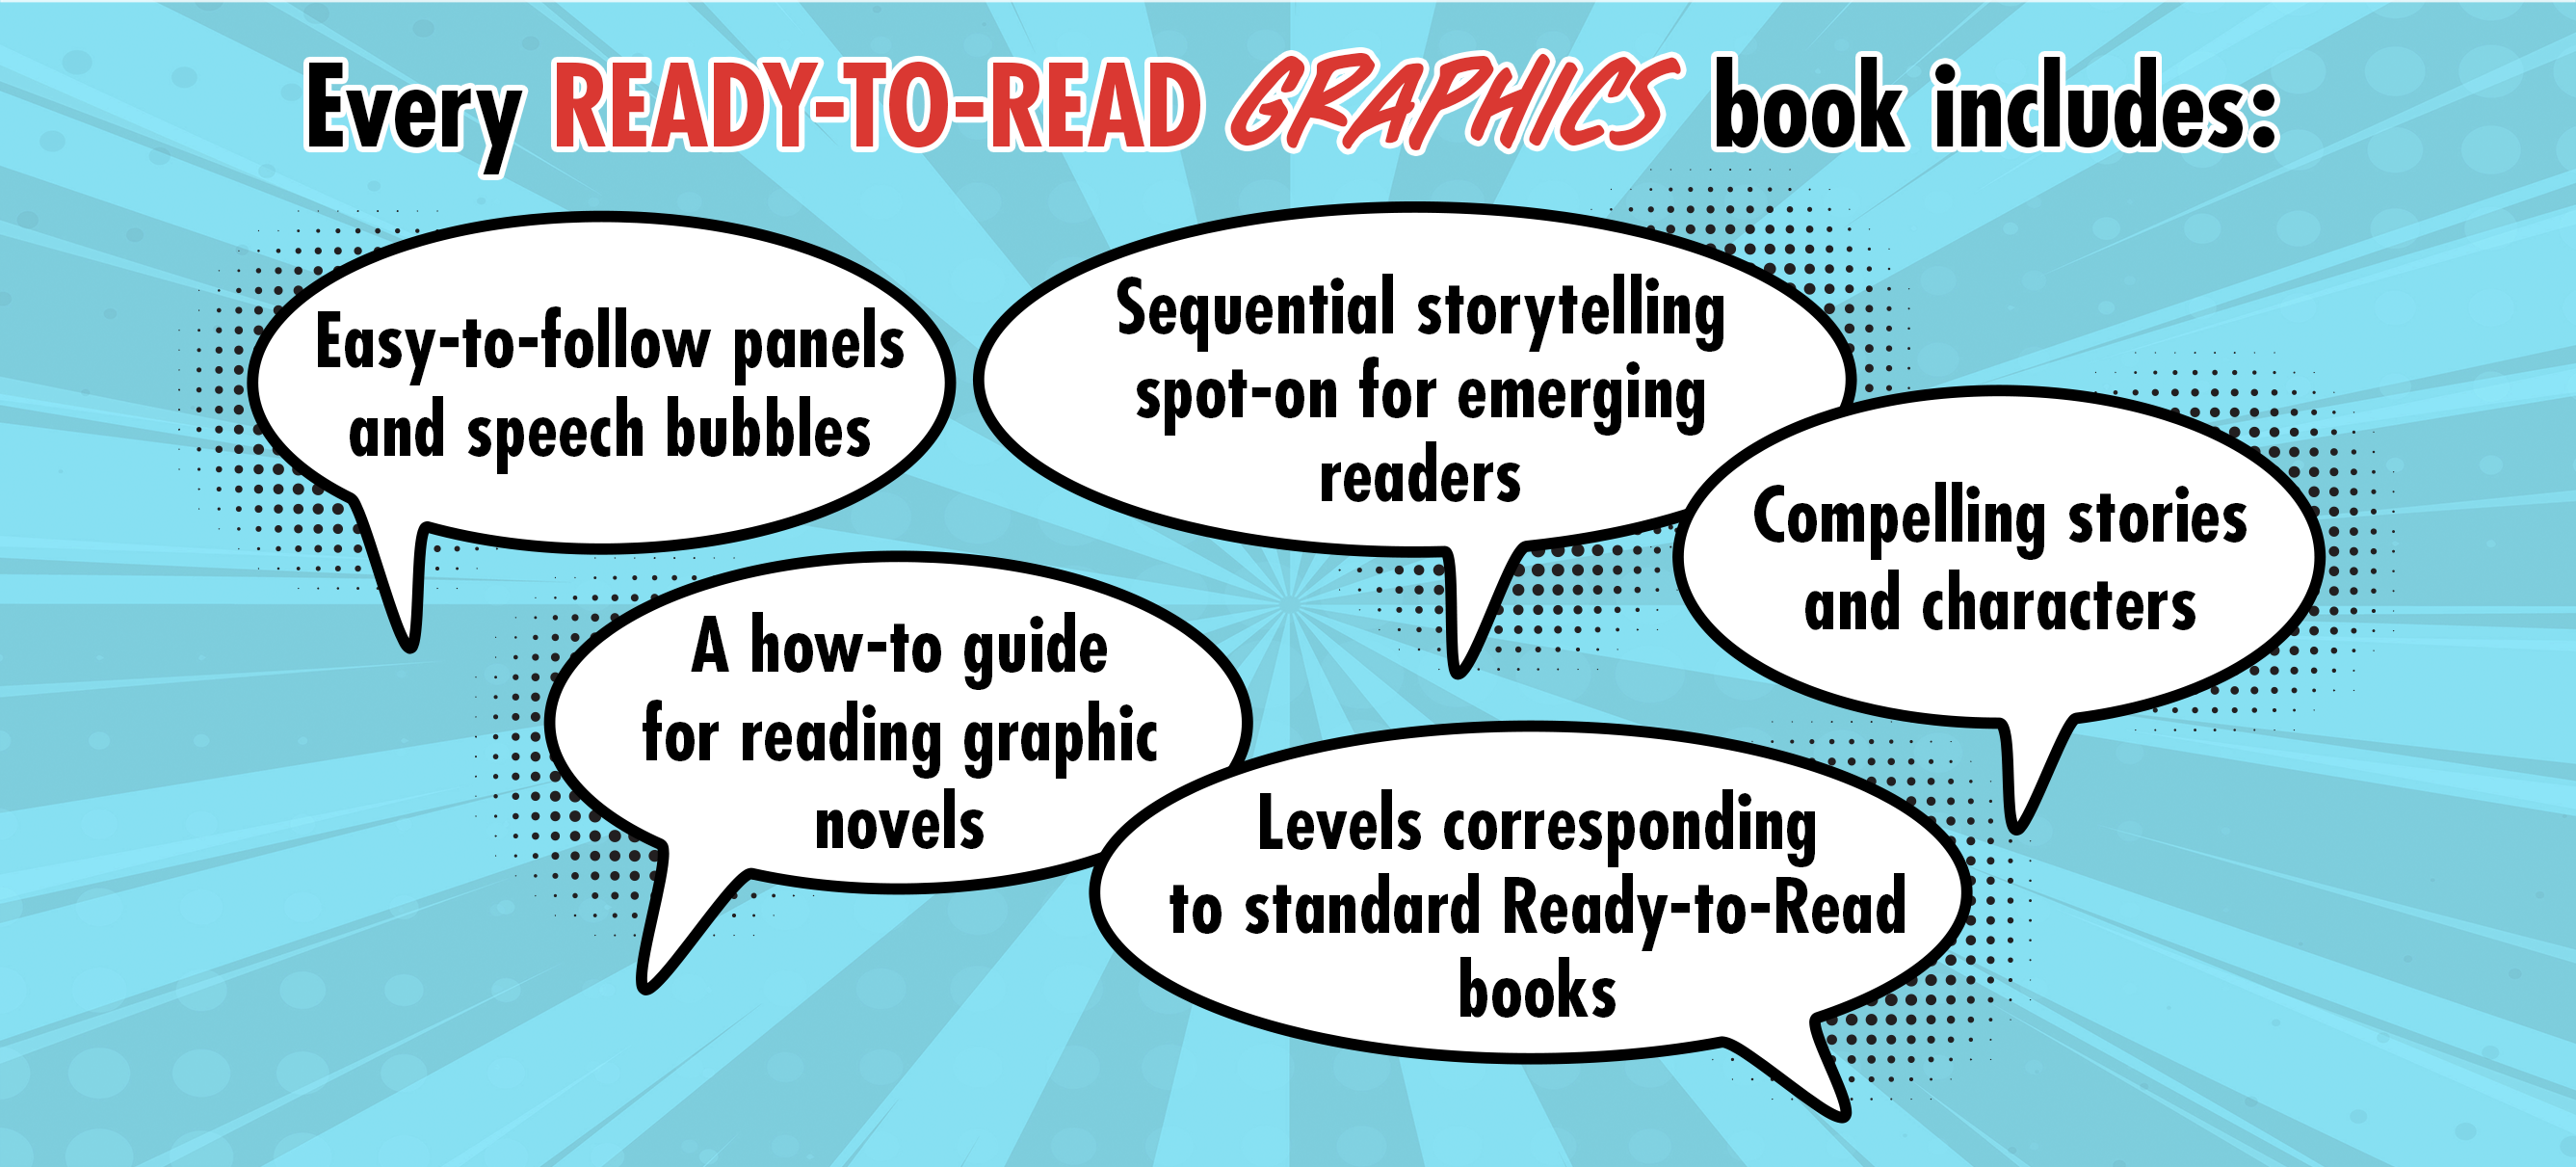 Ready-to-Read Graphics books give readers the perfect introduction to the graphic novel format with easy-to-follow panels, speech bubbles with accessible vocabulary, and sequential storytelling that is spot-on for beginning readers. There’s even how-to a guide for reading graphic novels.